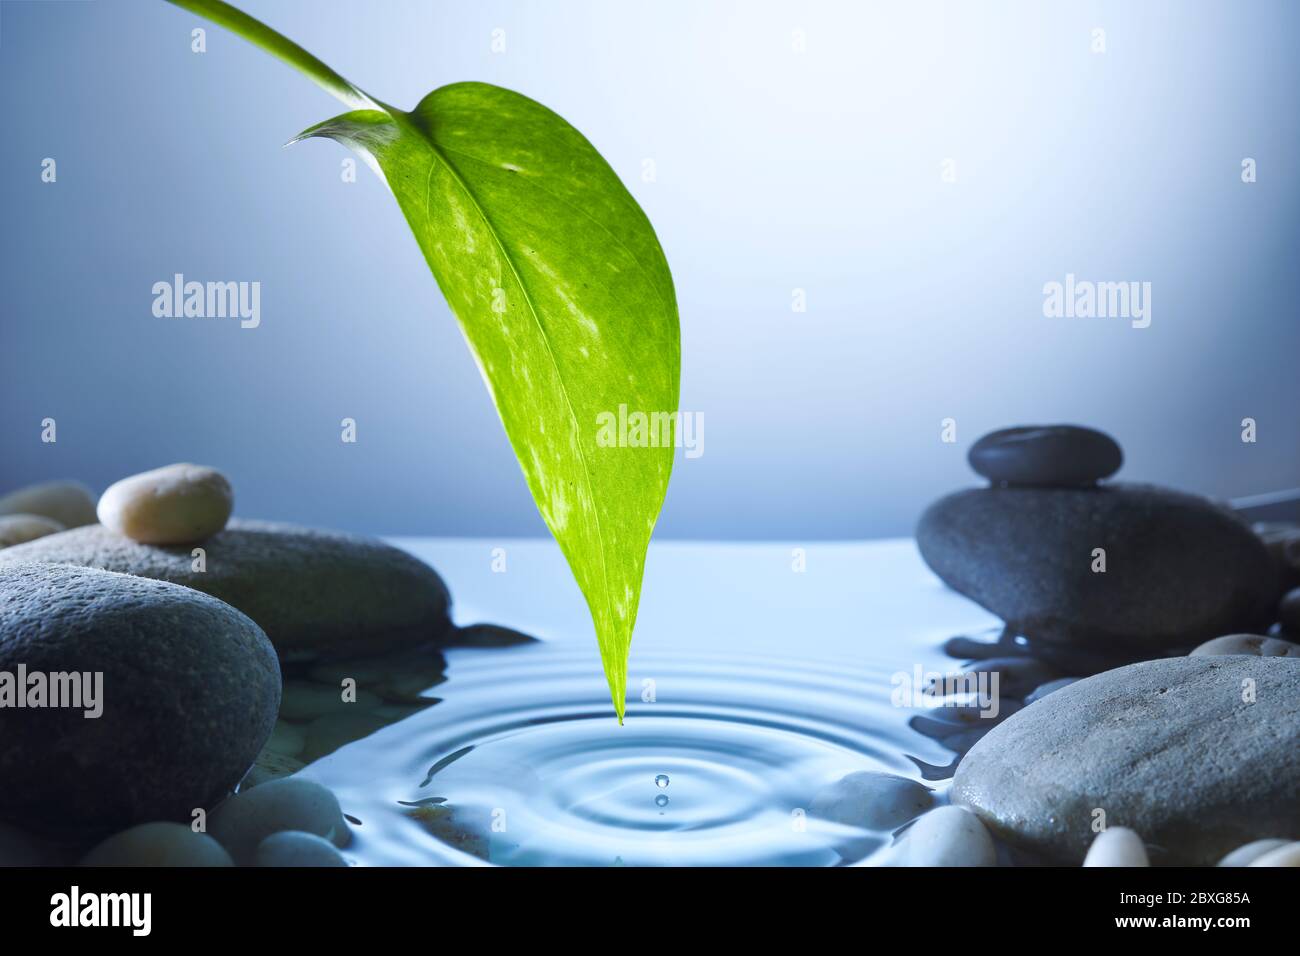 Perfect water drop falling from a leaf into a pond with ripples Blue tones to reflect puddle in night time surrounded by pebbles. Peaceful tranquility Stock Photo